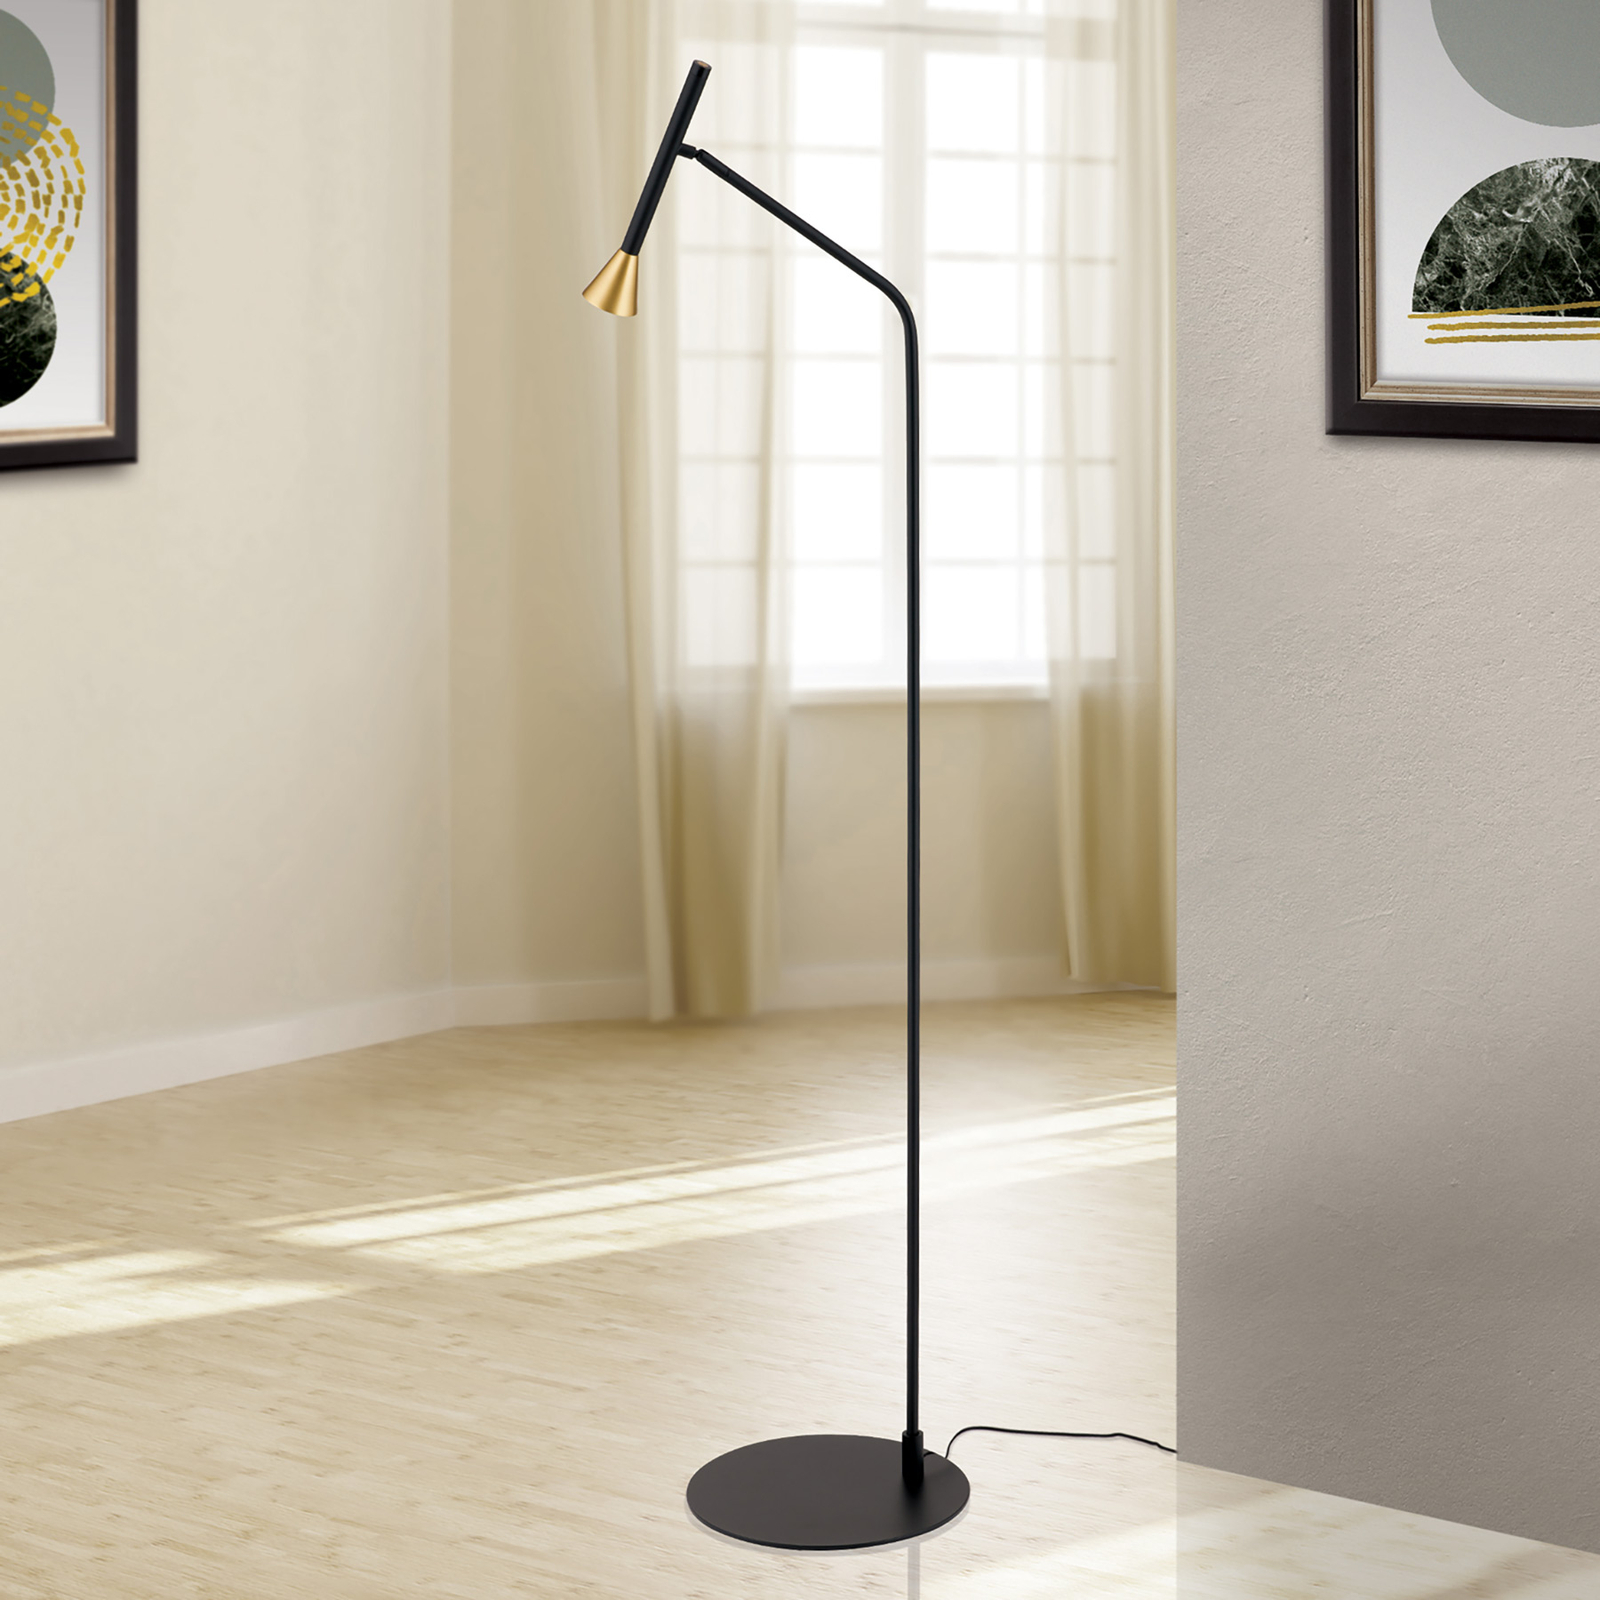 Odeon LED floor lamp with a touch dimmer